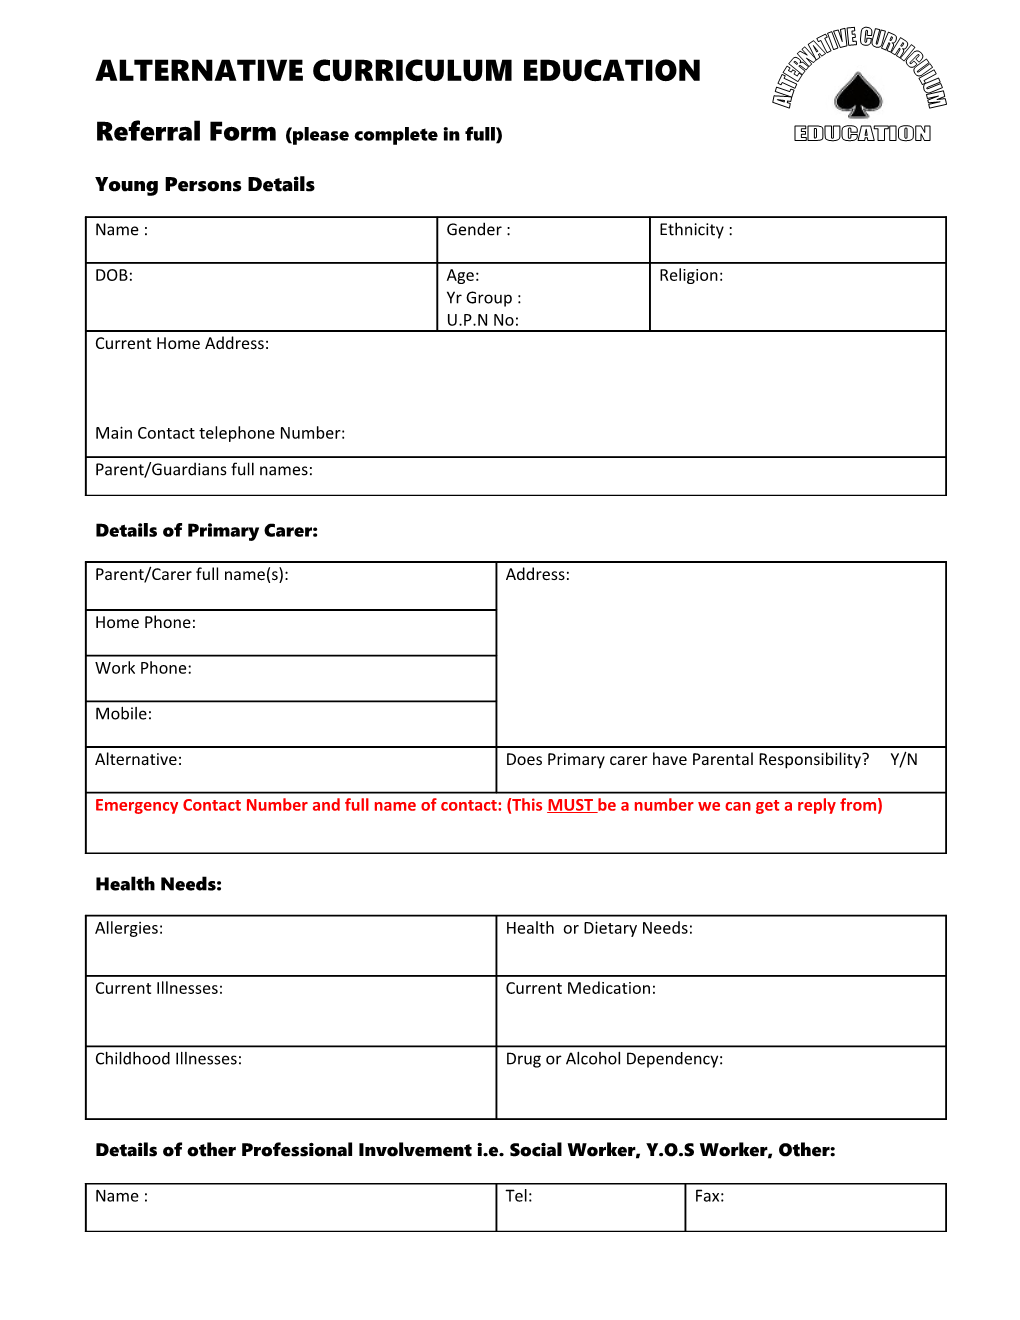 Referral Form (Please Complete in Full)